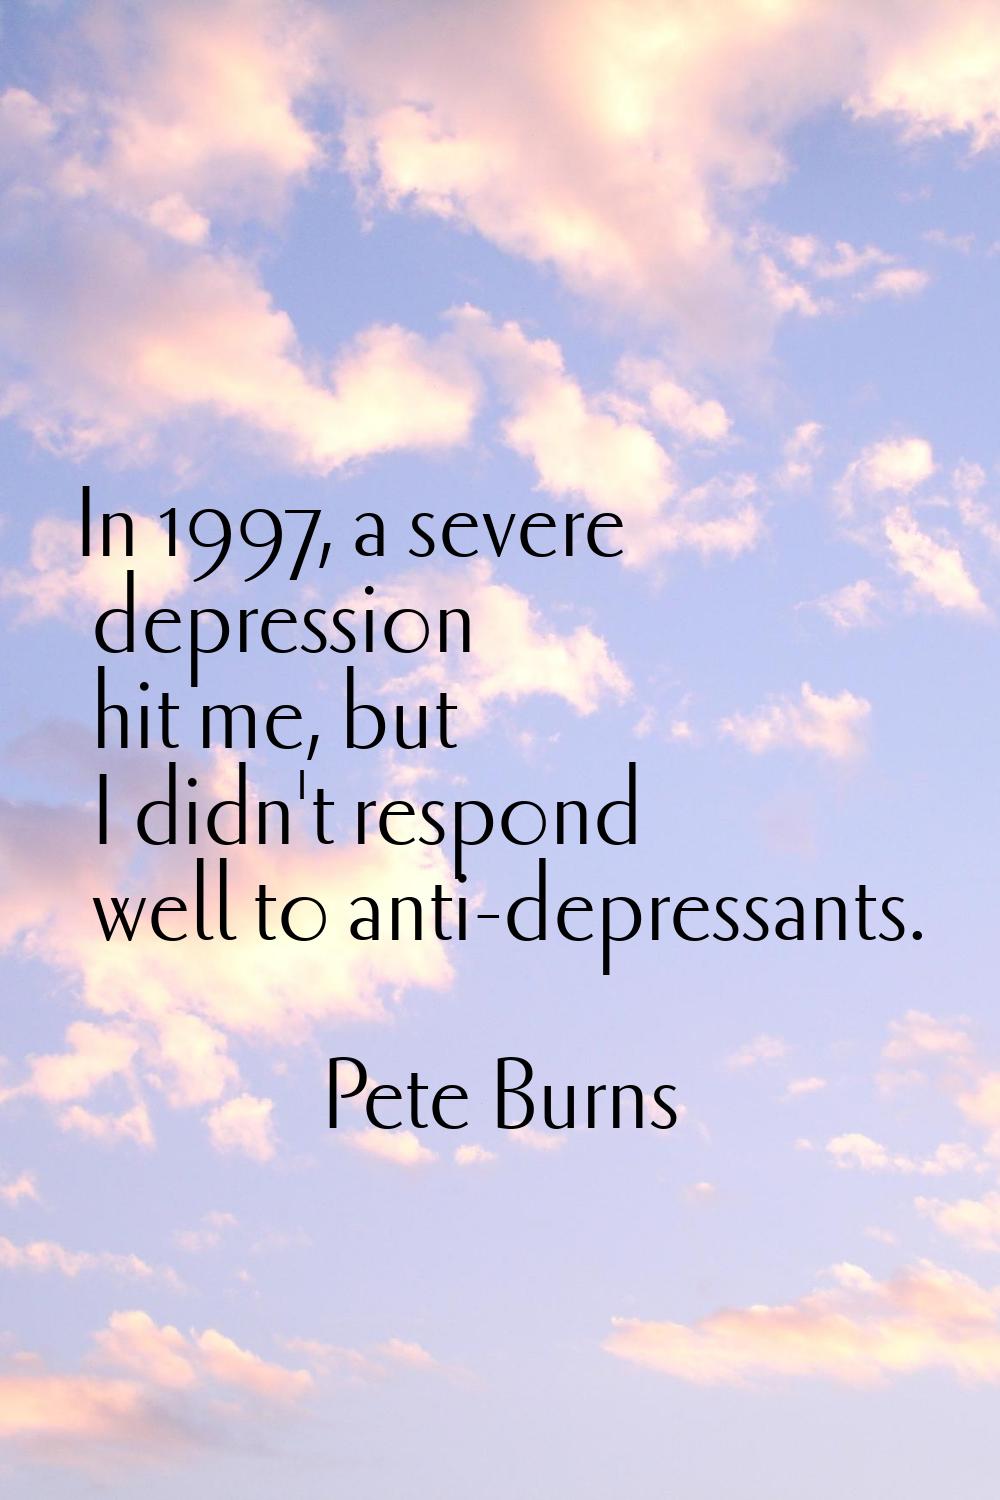 In 1997, a severe depression hit me, but I didn't respond well to anti-depressants.